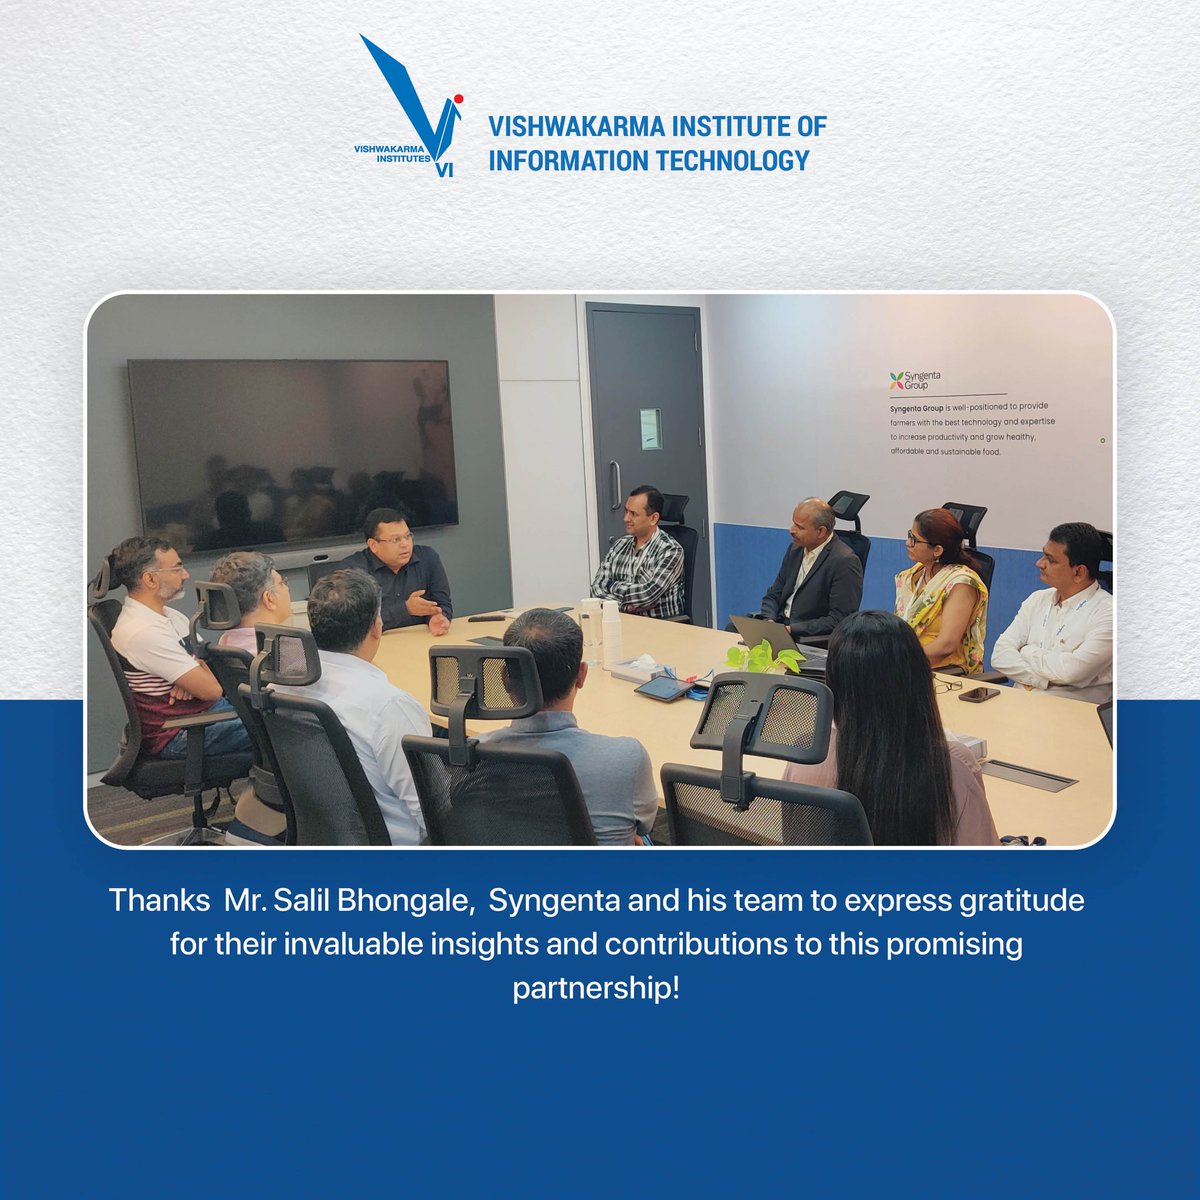 Excited to announce MoU between VIIT and Syngenta! We're diving into ML integration, empowering third-year AI/ML students with hands-on skills for real-world impact. Industry-driven learning at its best!
#VIITPune #InnovativeCollaborations #CuttingEdgeTech #MLIntegration #AIandML